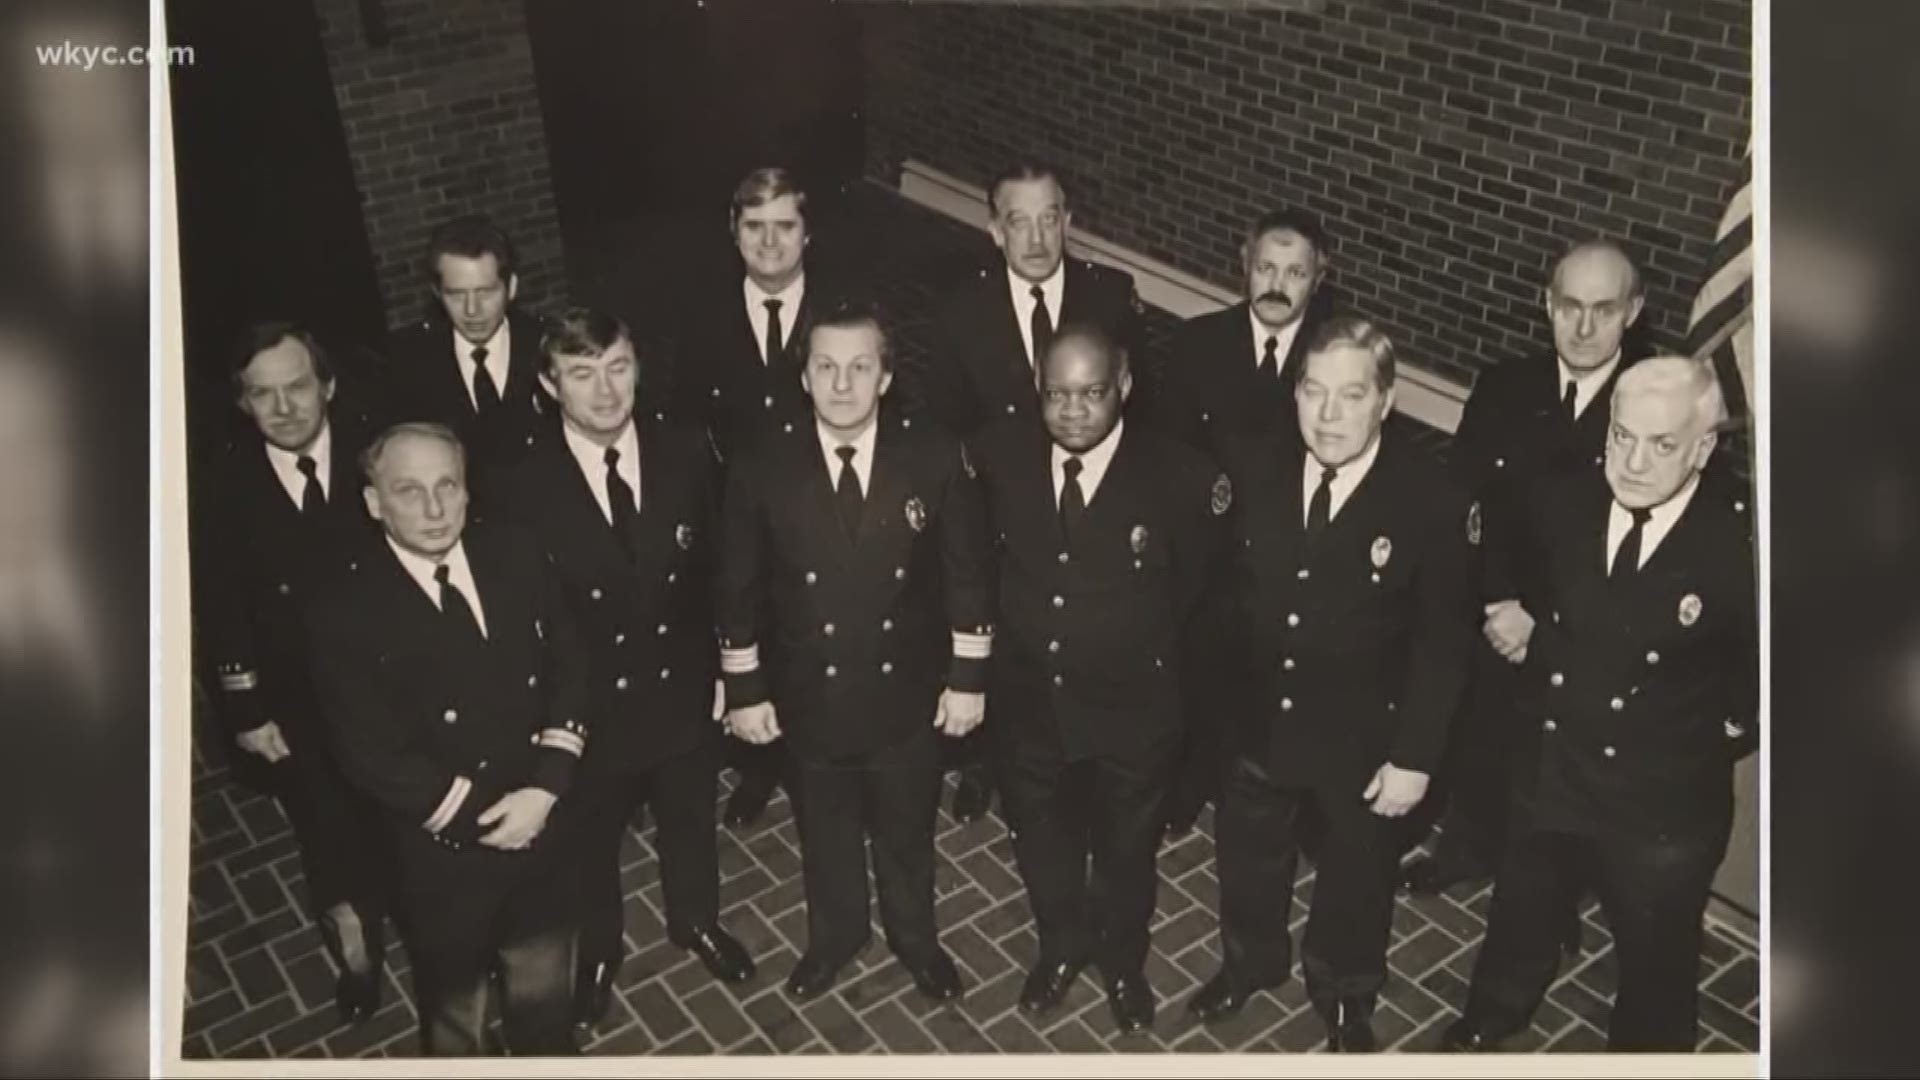 One of Cleveland's first black firefighters honored